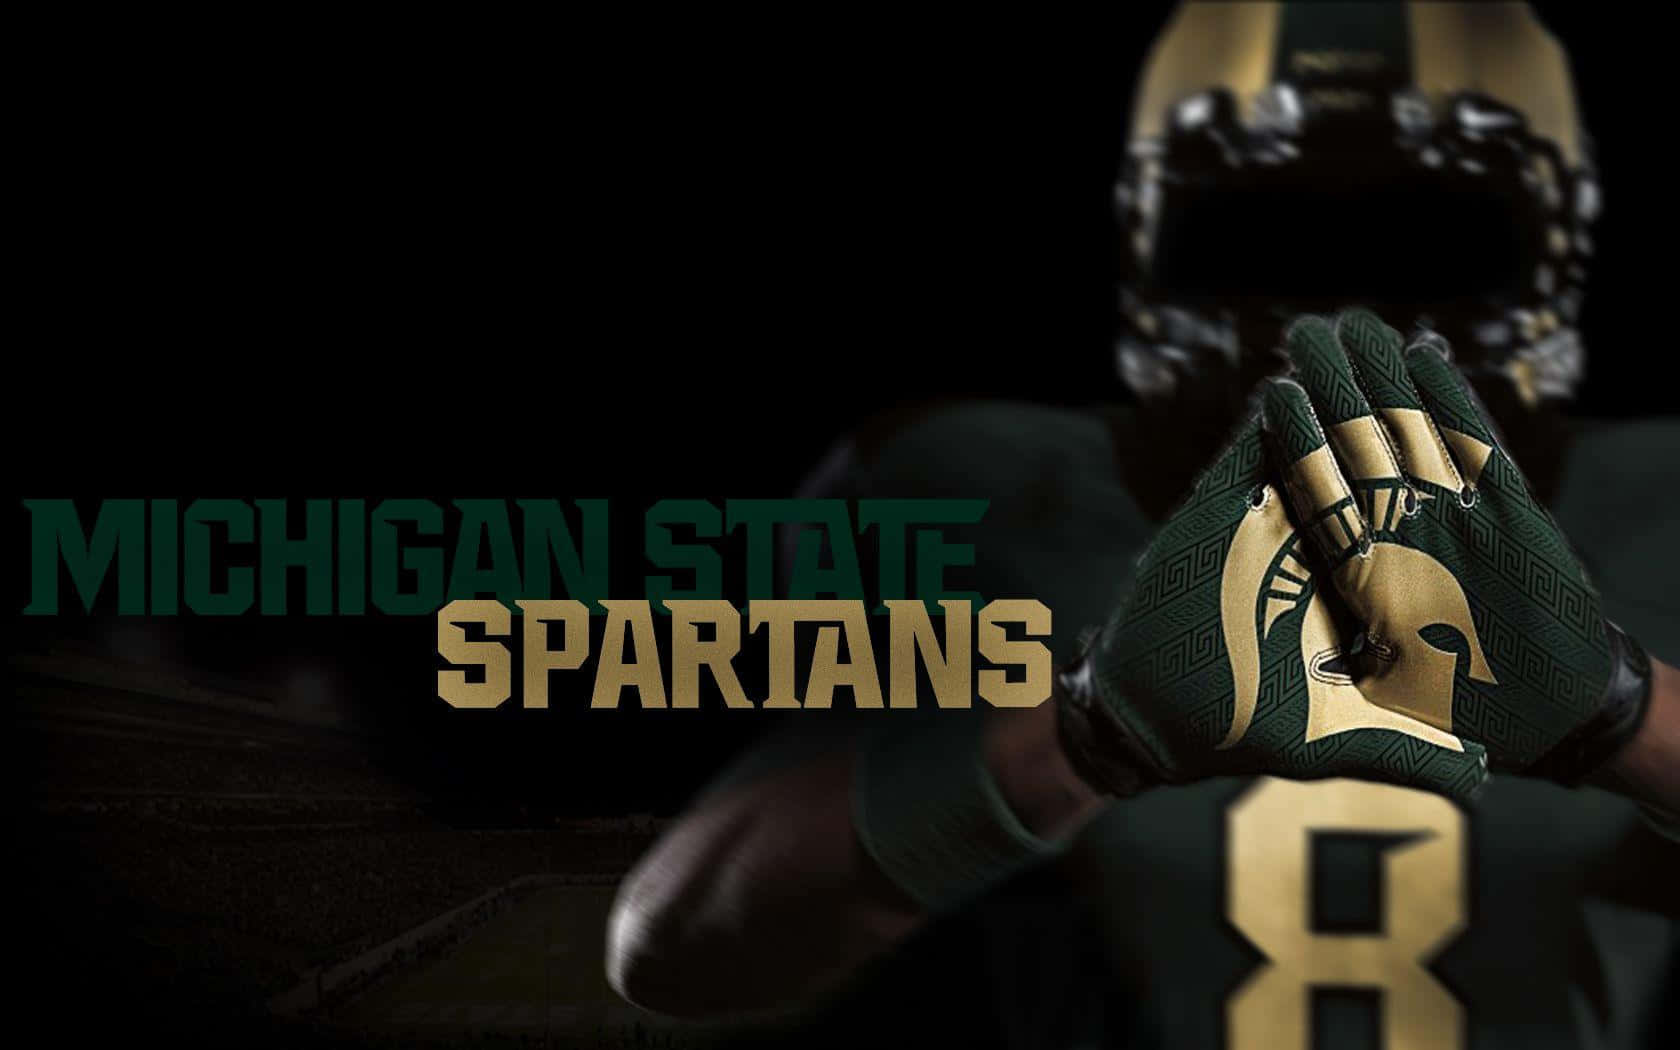 Michigan State Spartans With Athlete